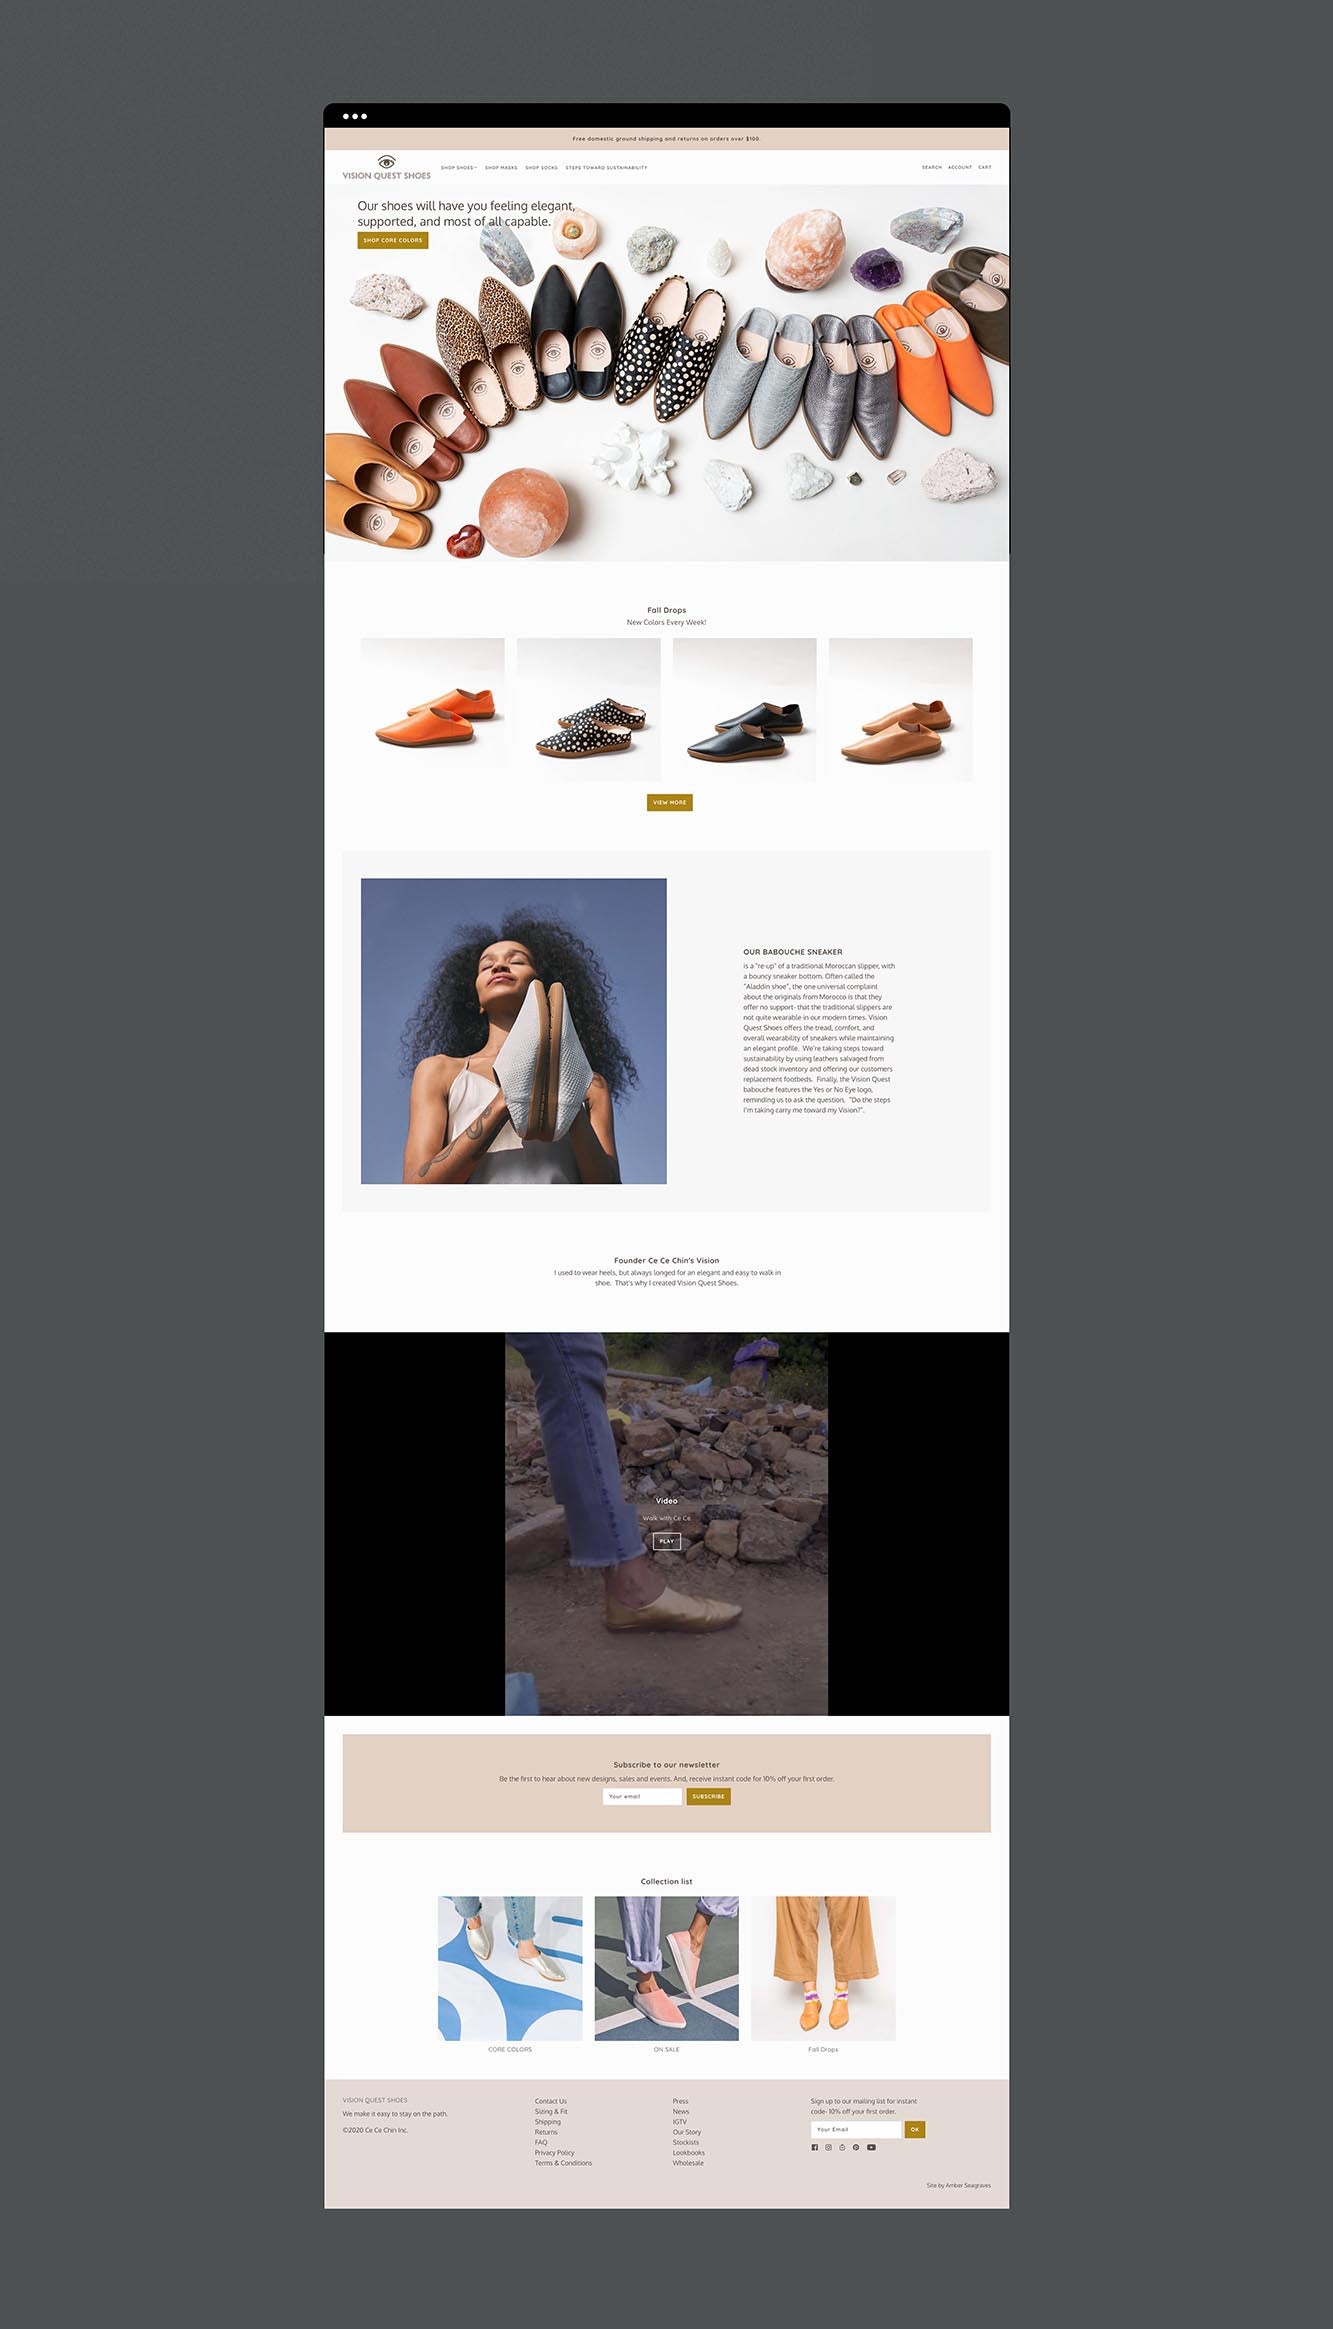 Vision Quest Shoes Shopify Ecommerce Website by Studio Seagraves Design Agency St. Louis Missouri Female owned Branding and Web Design